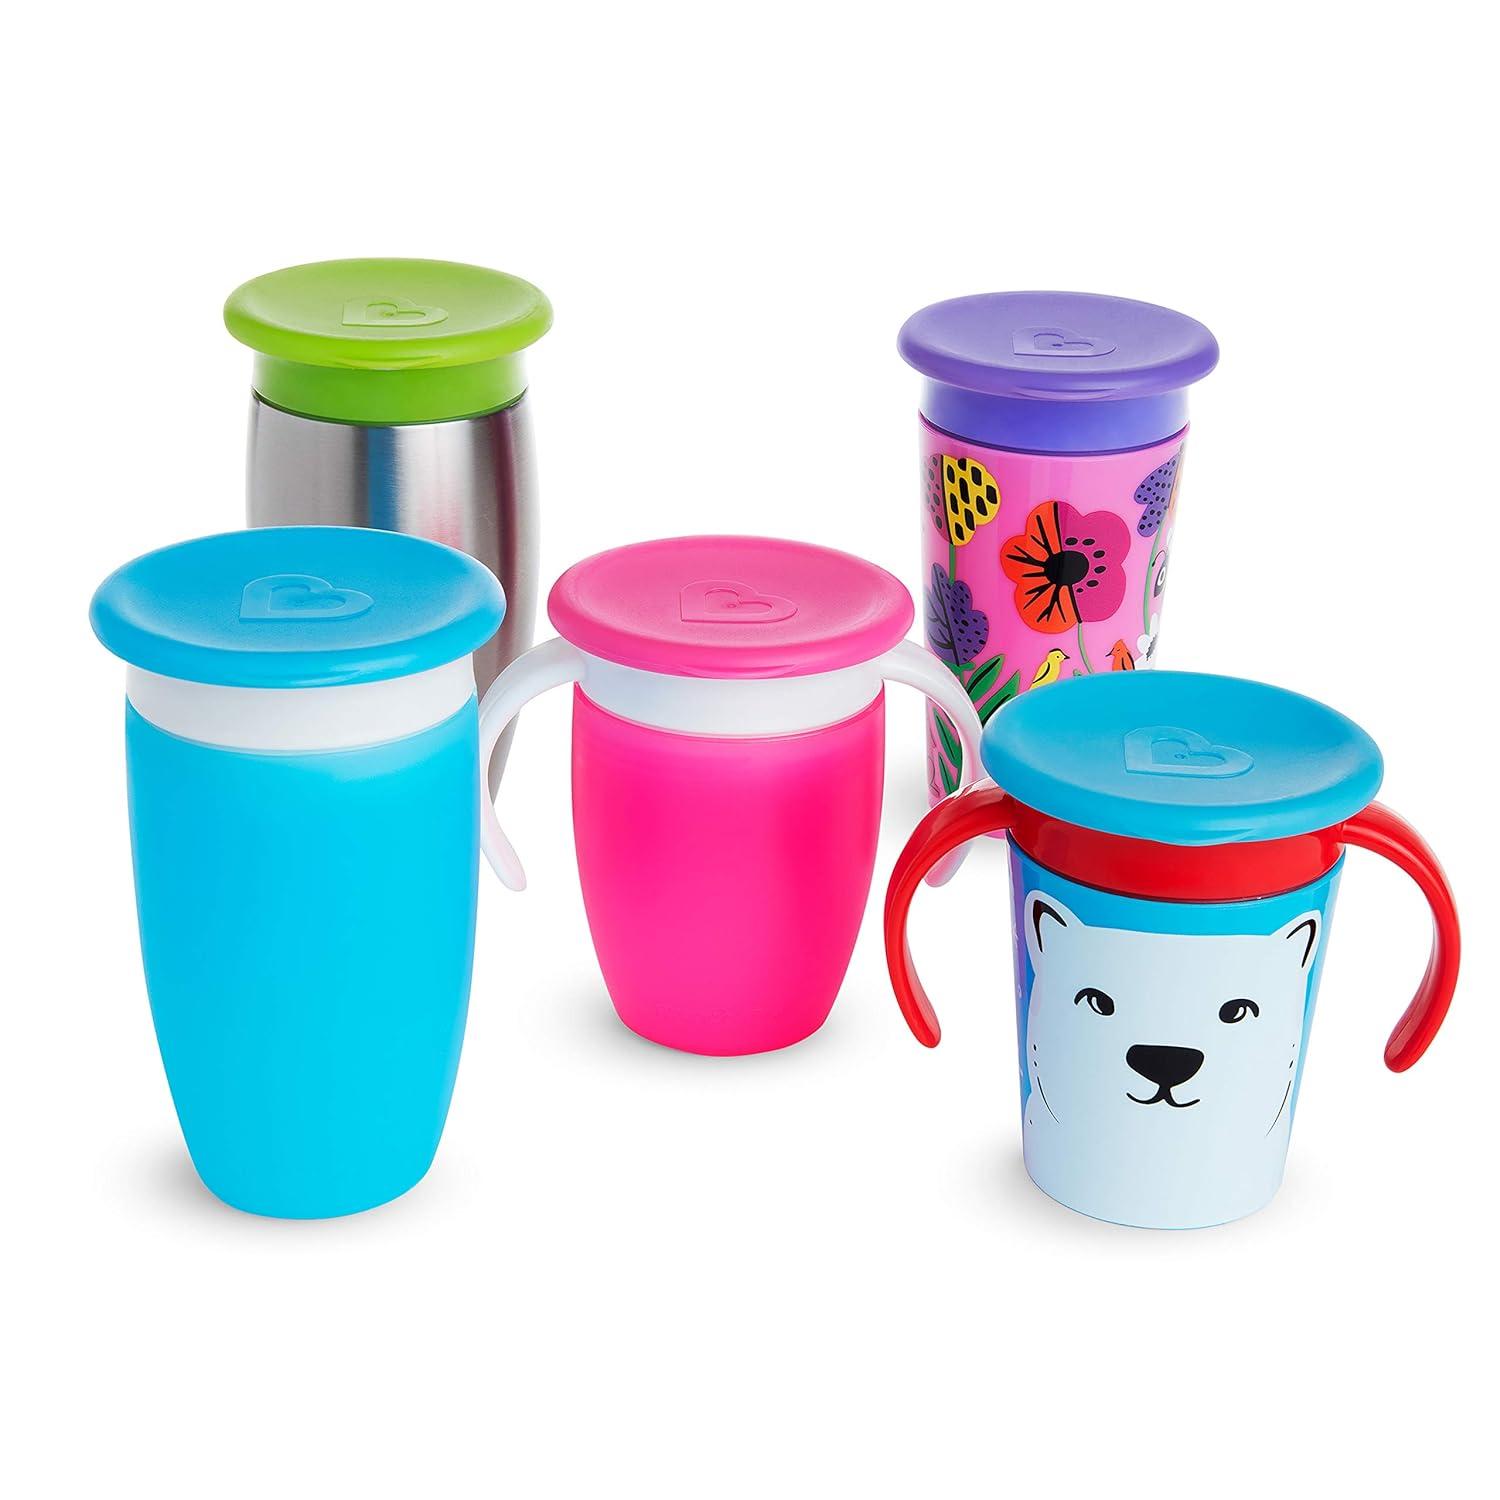 Munchkin Miracle Stainless Steel 360 Sippy Cup, Assorted